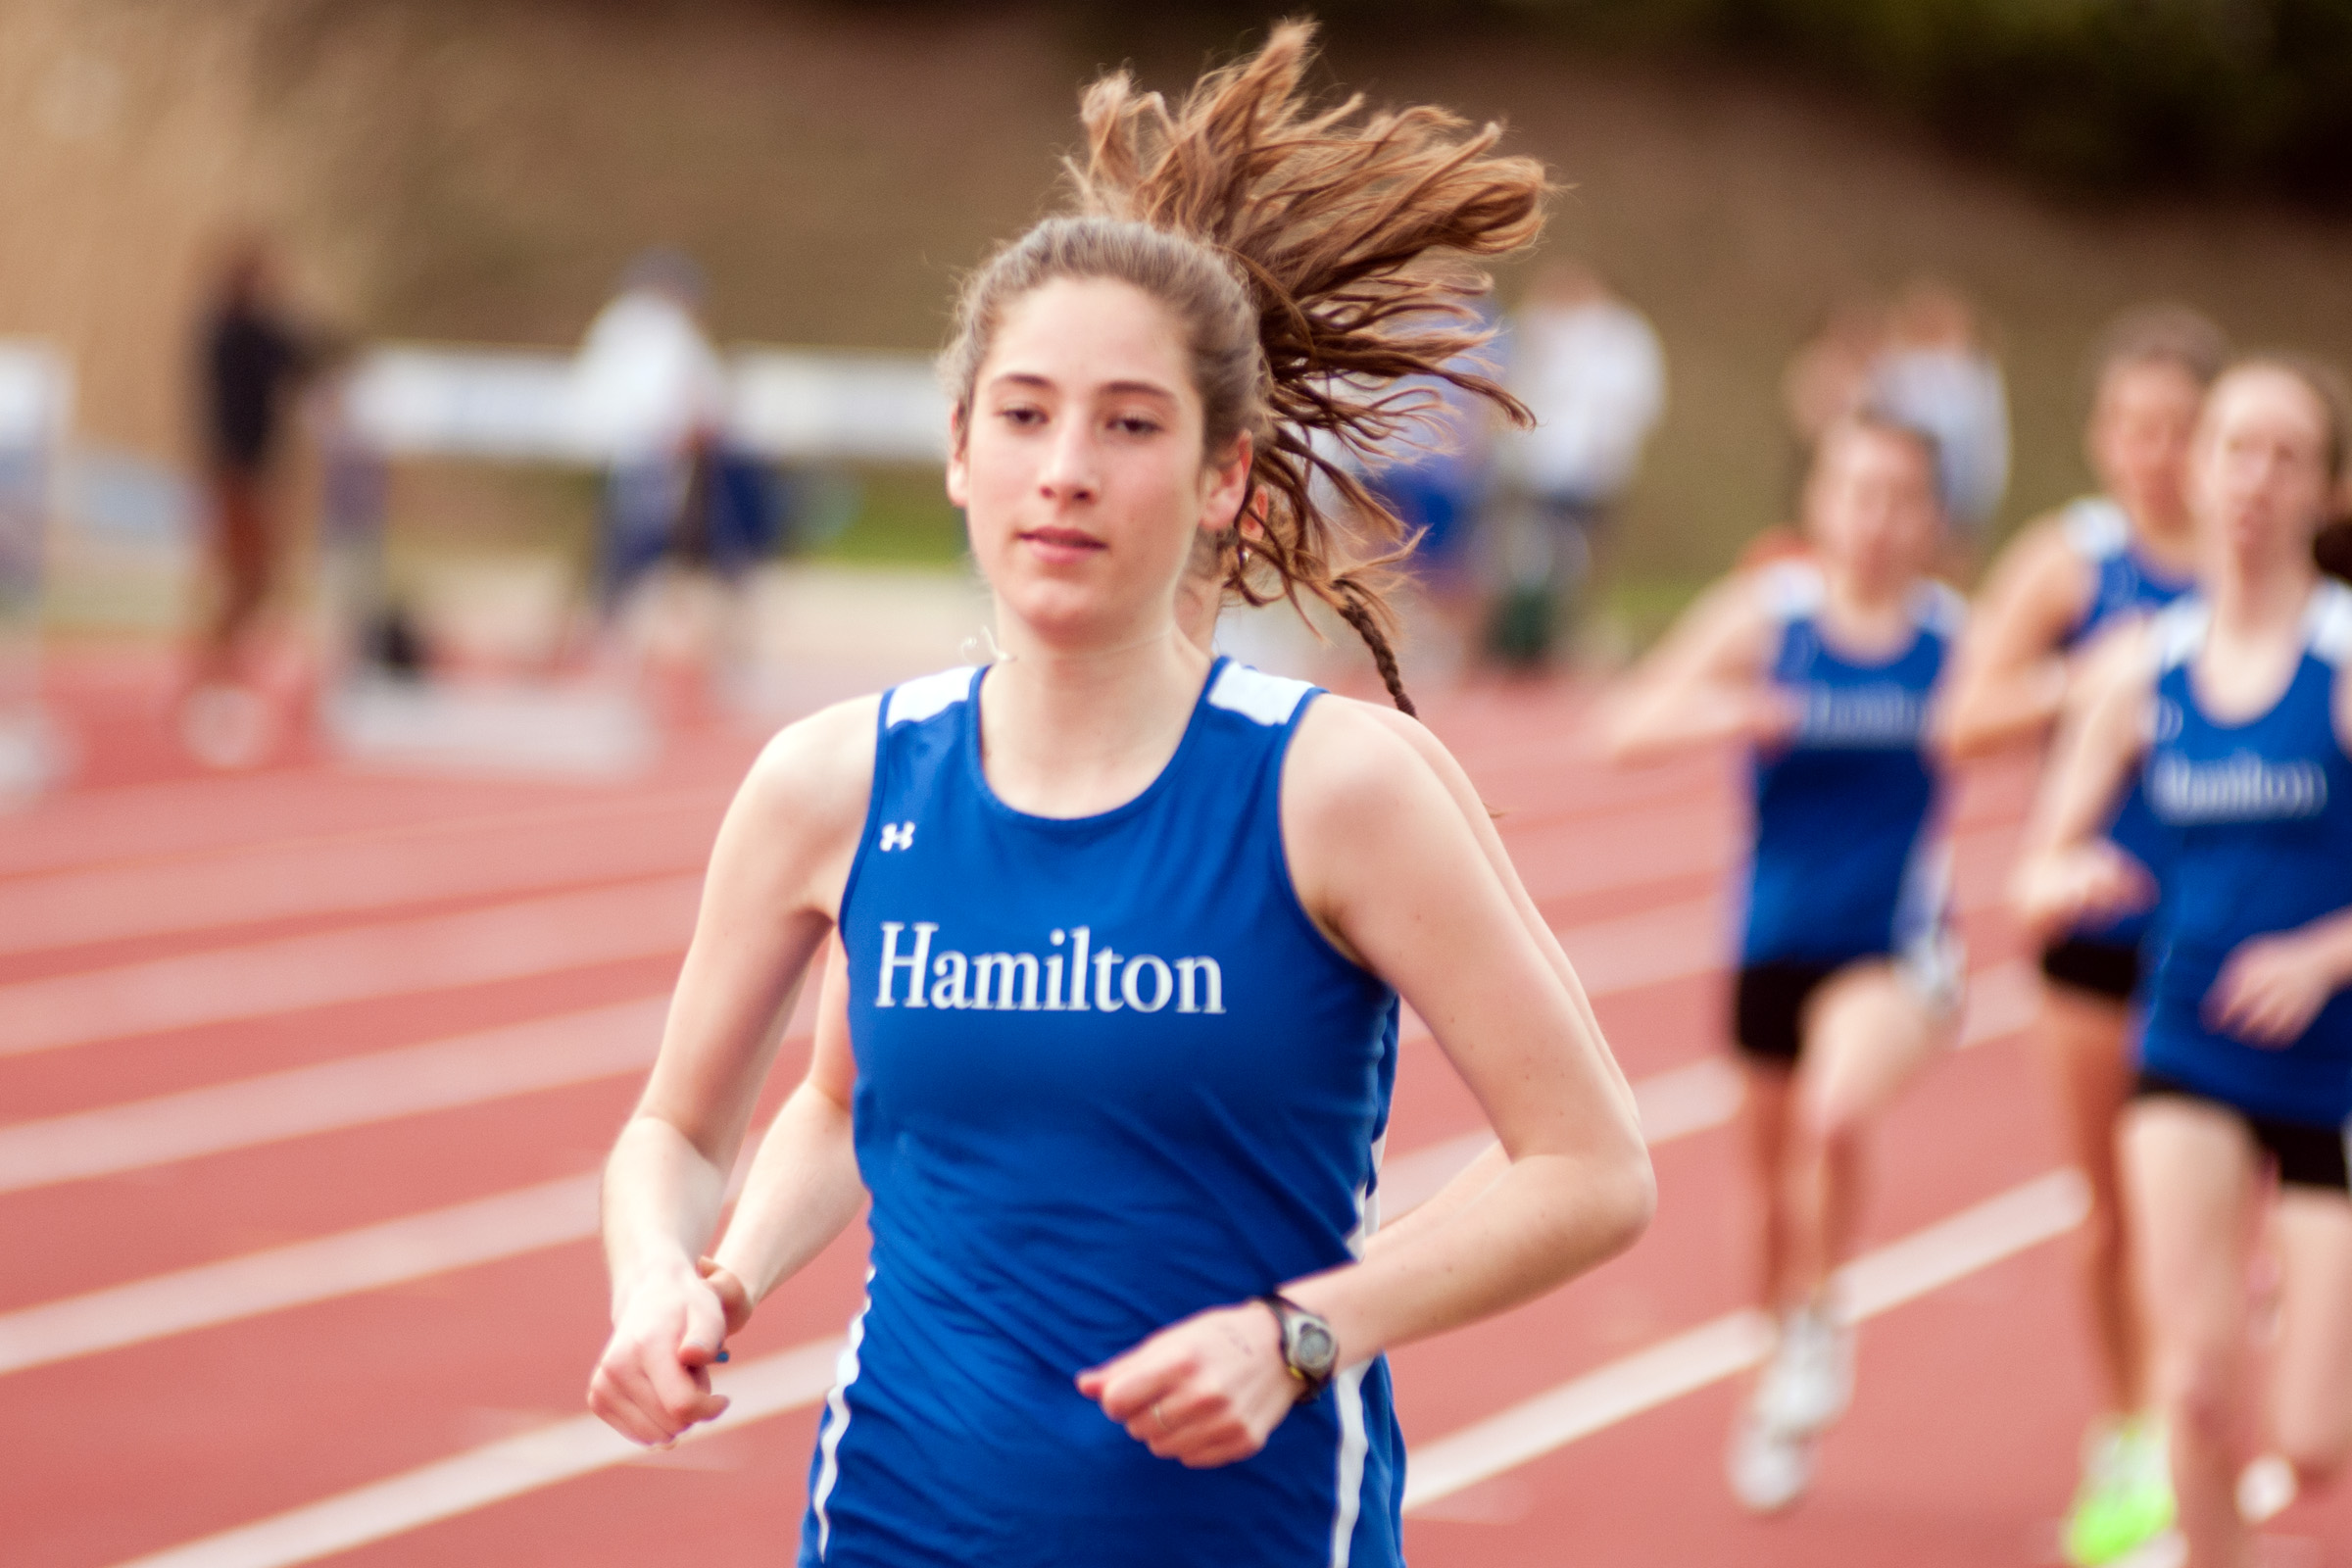 Women's track & field places eighth at NYSCTC meet - News